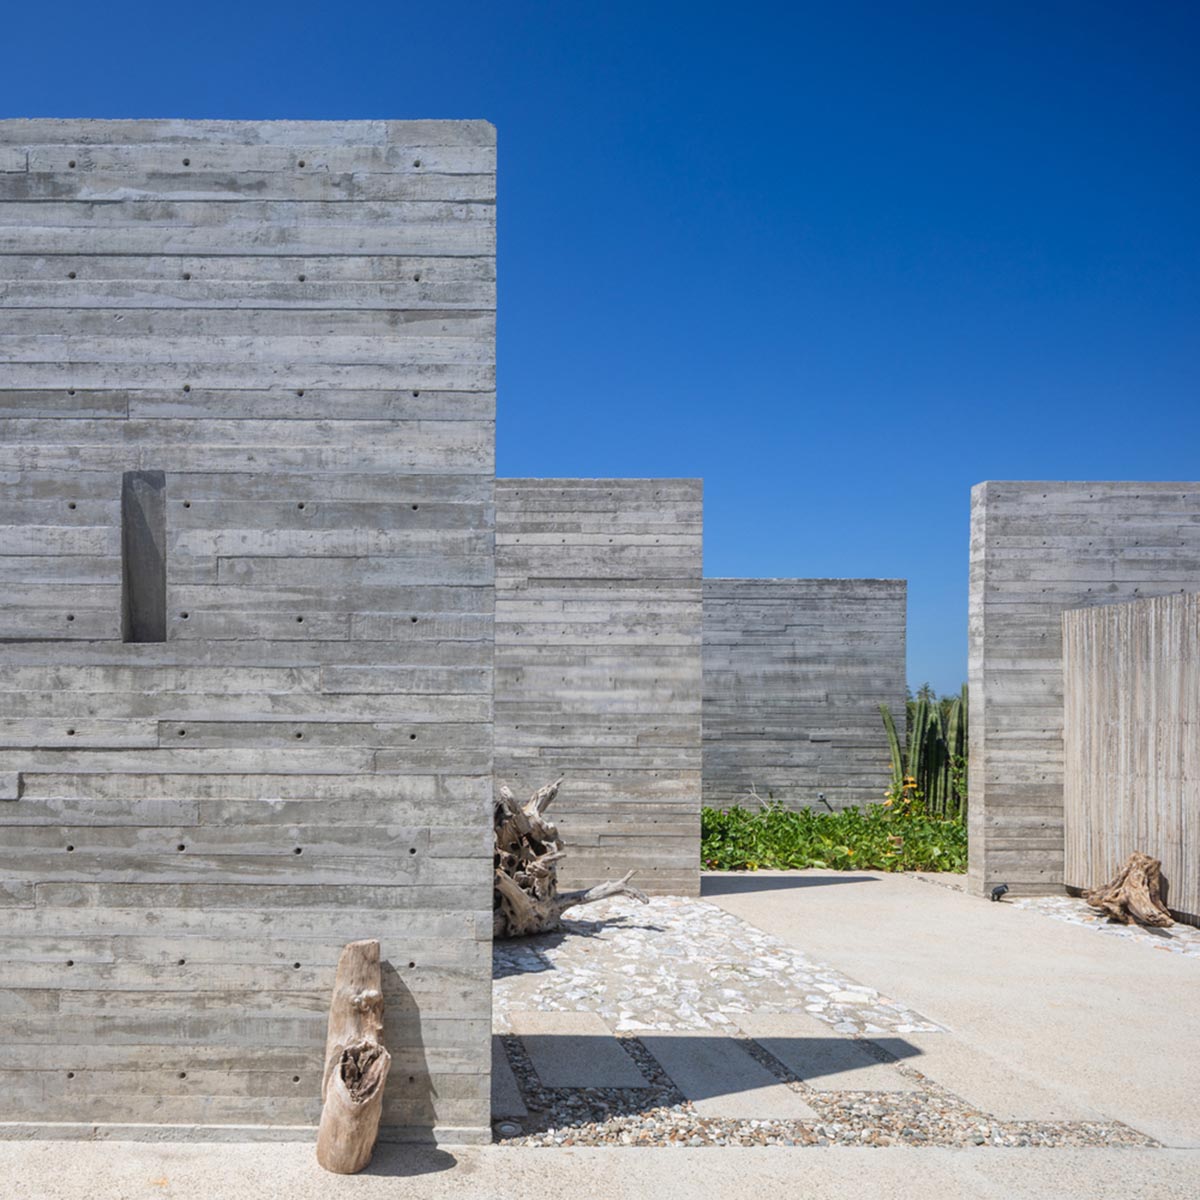 A system of parallel concrete walls forms Casa Cova with private ...